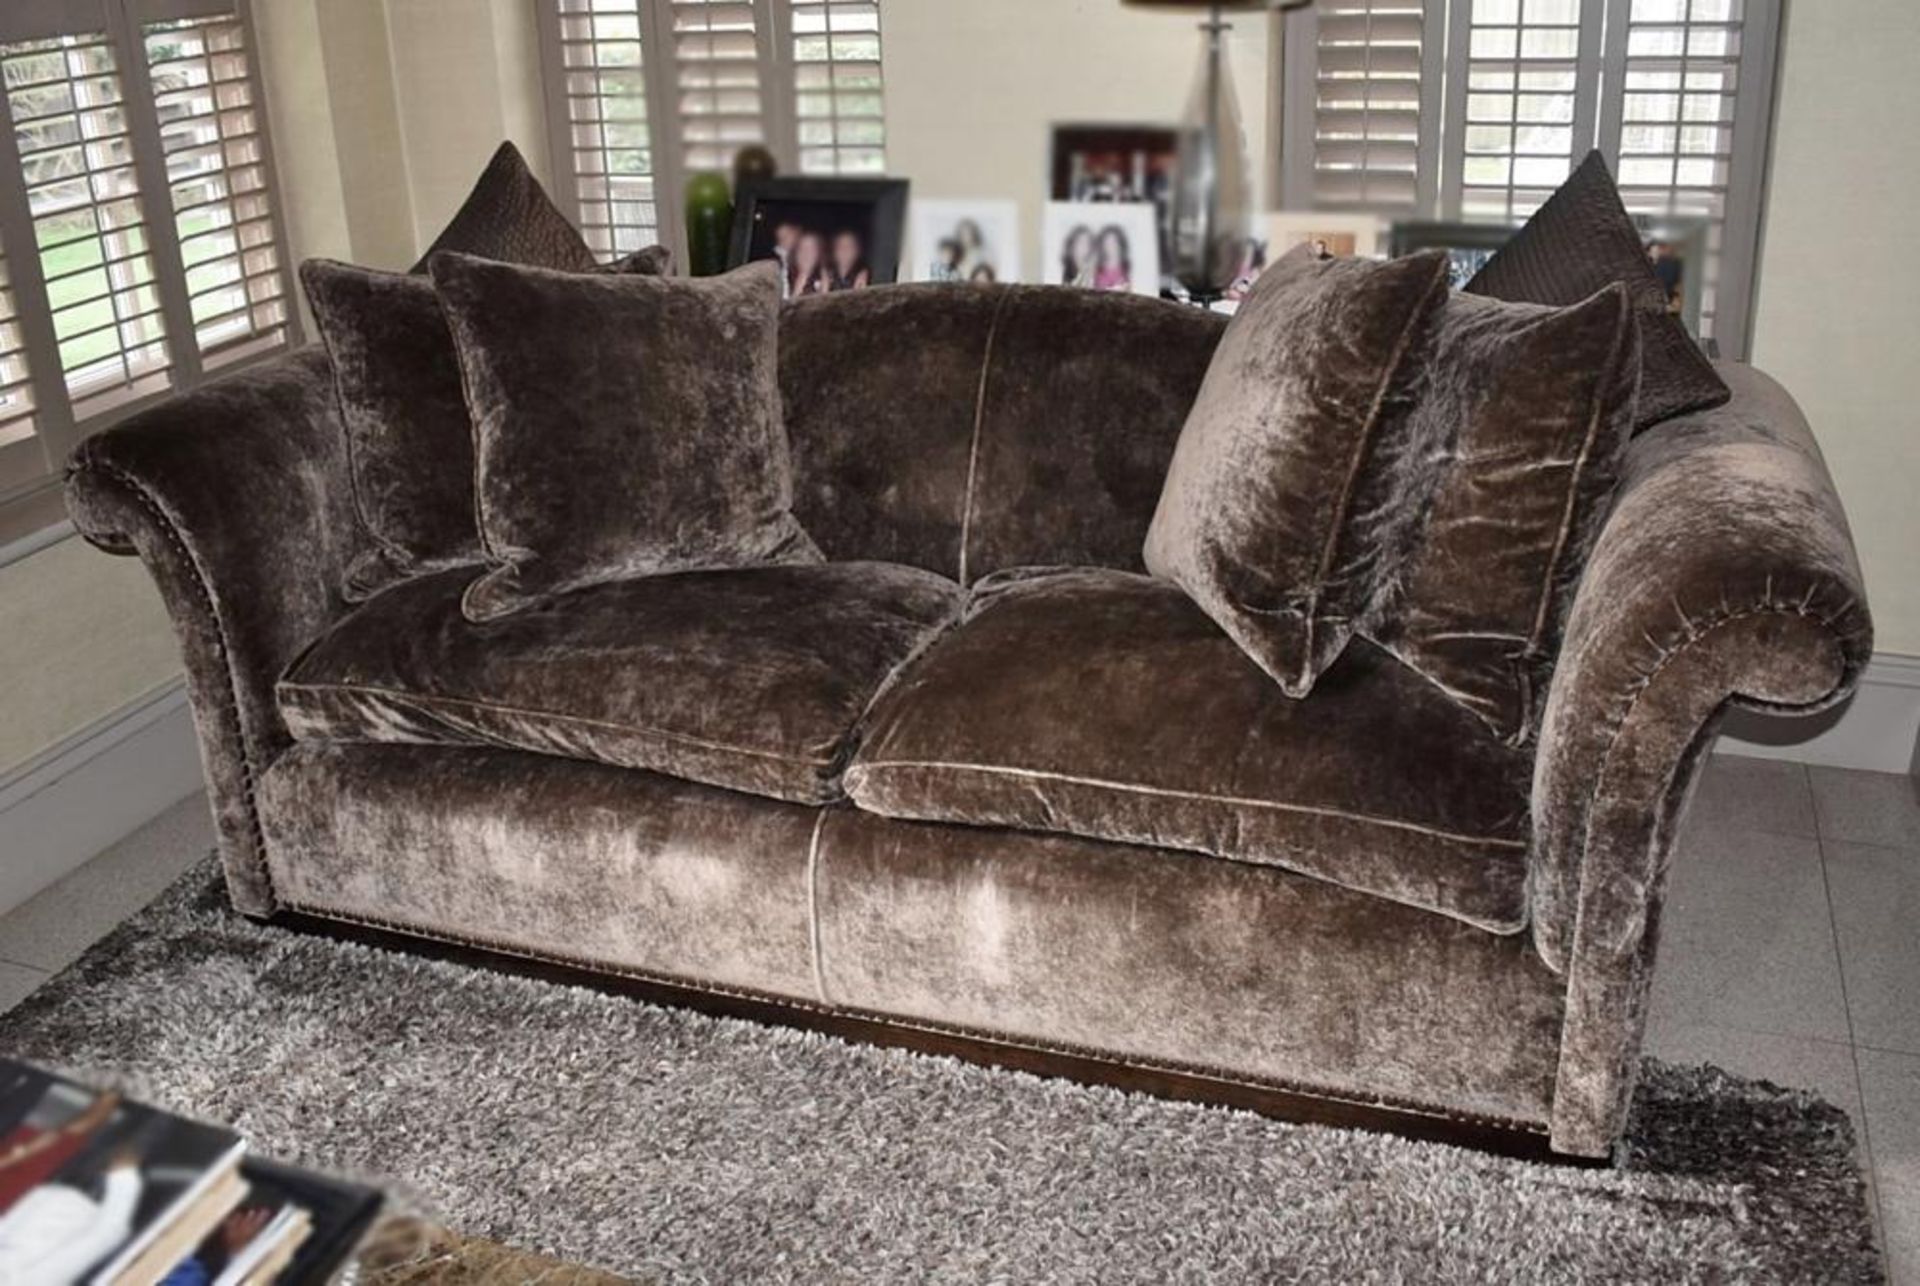 1 x Large Well Upholstered Sofa In A Rich Brown Chenille With Studded Detailing - Includes Cushions